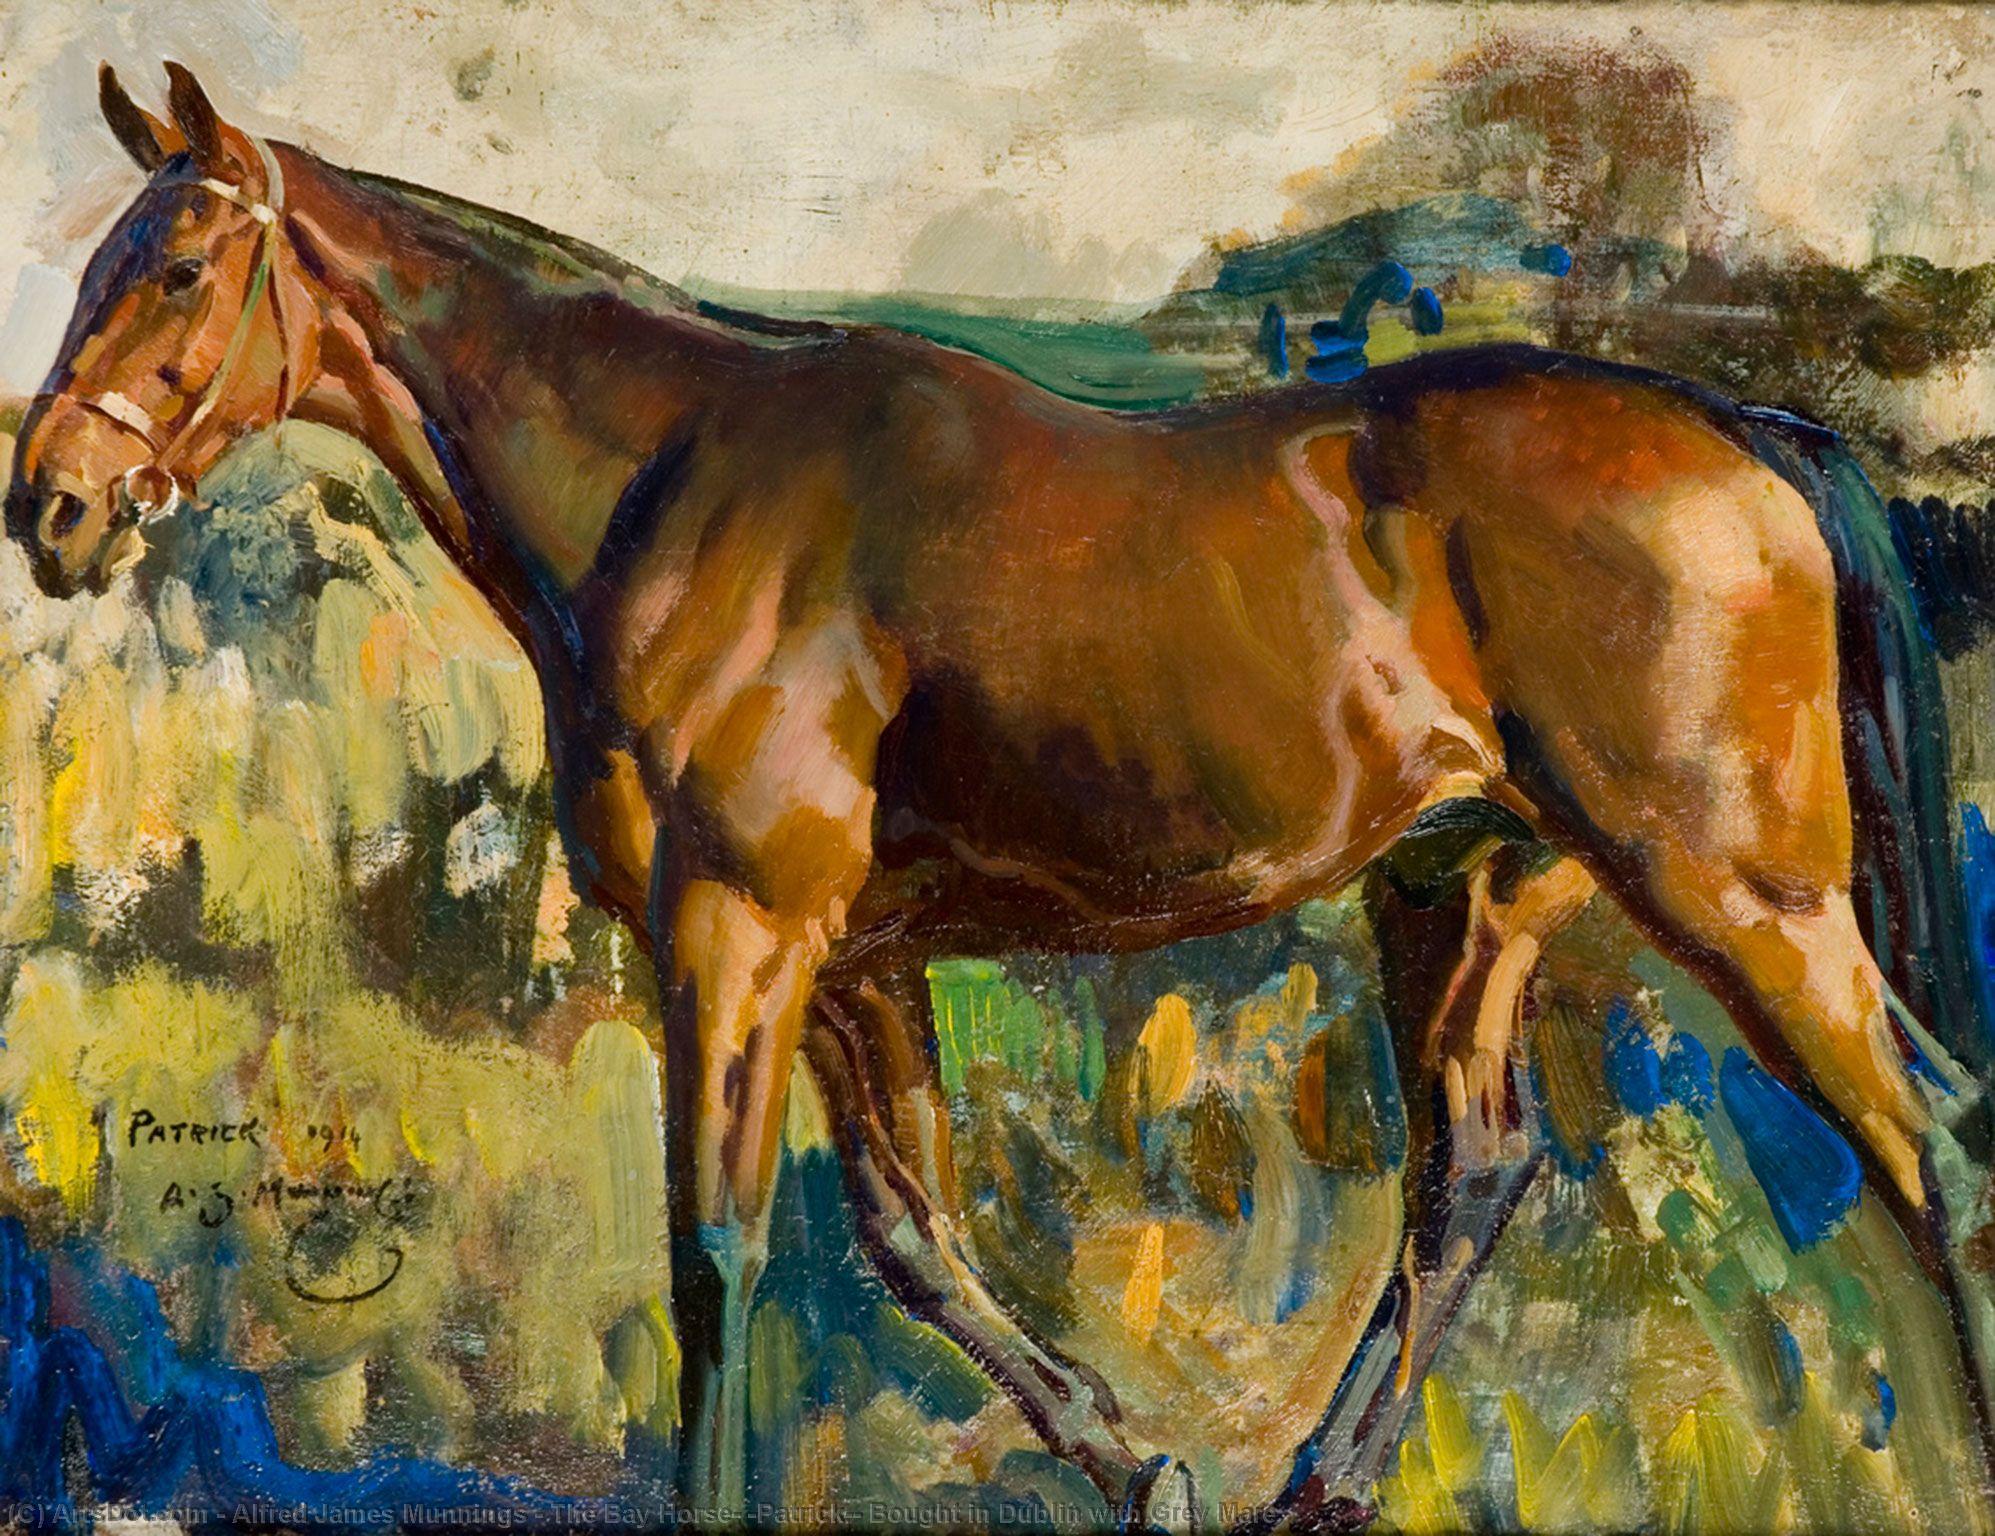 WikiOO.org - Encyclopedia of Fine Arts - Malba, Artwork Alfred James Munnings - The Bay Horse, 'Patrick', Bought in Dublin with Grey Mare